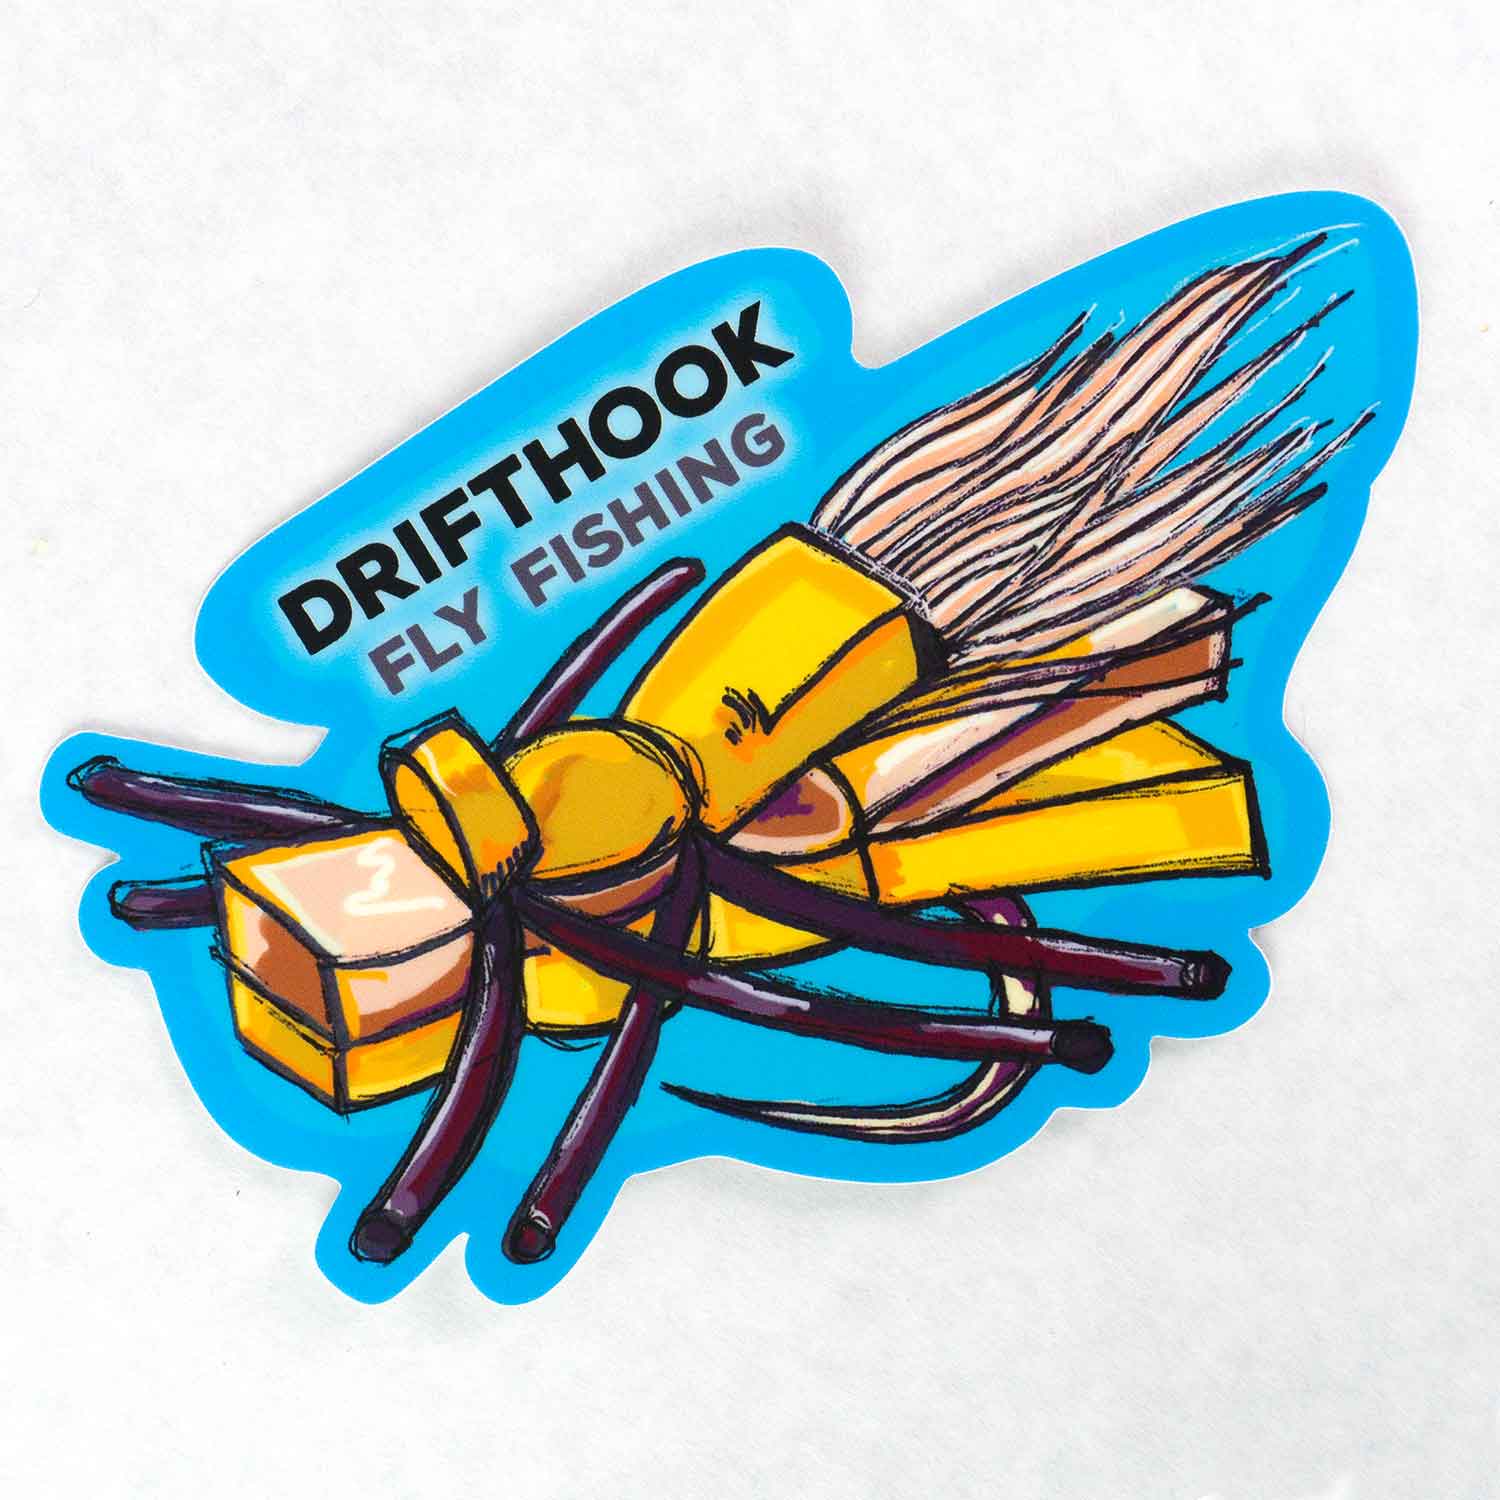 Fly Fishing Sticker Five Pack - Big Bugs!